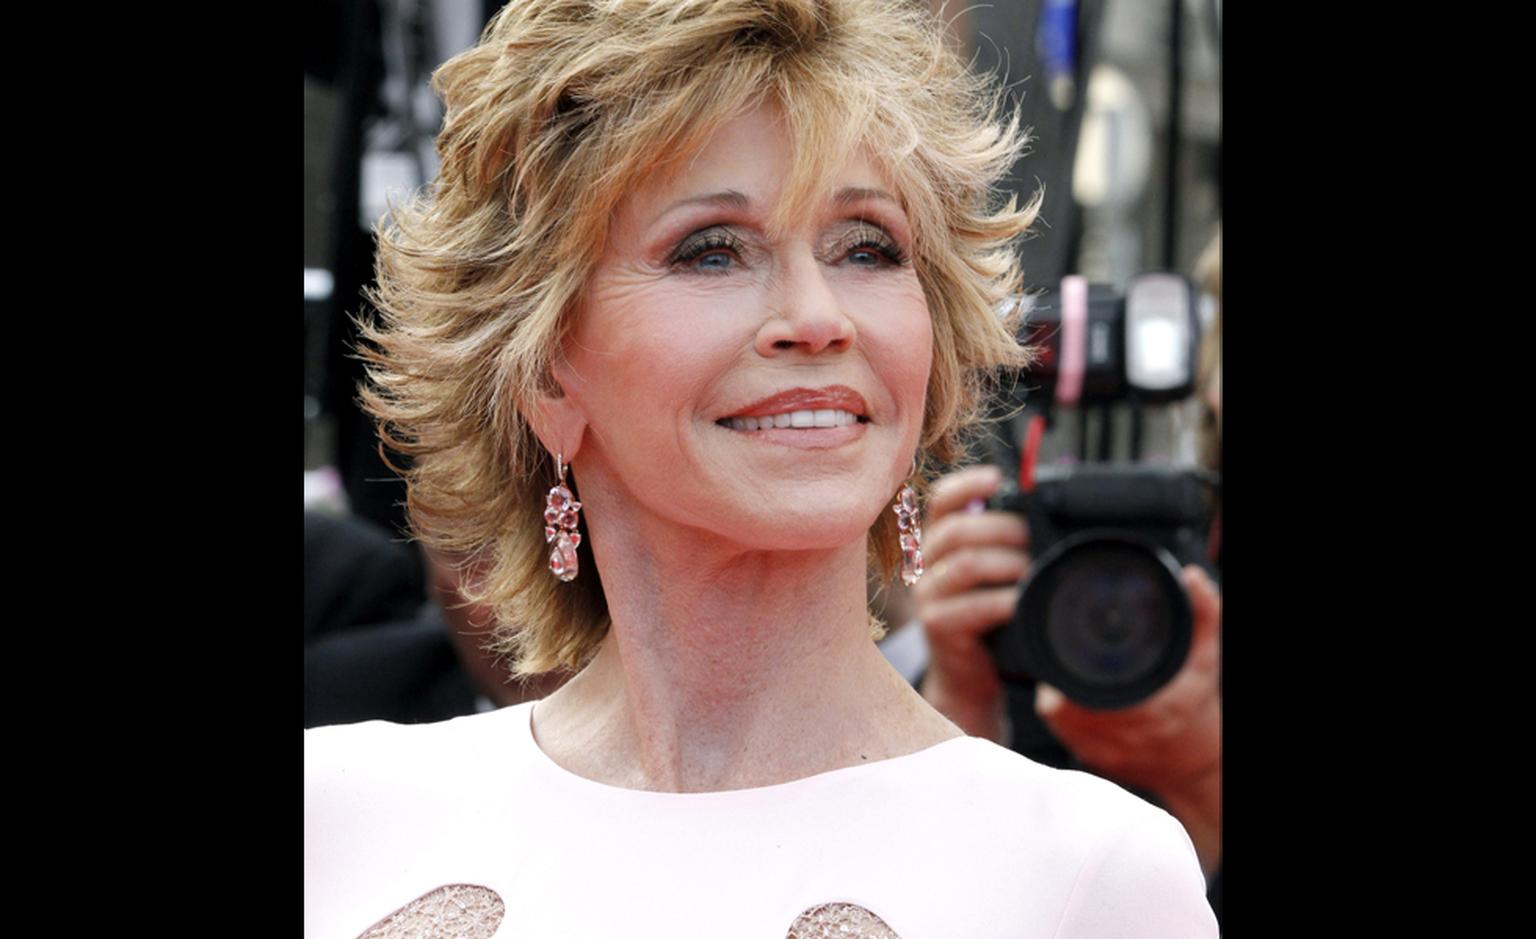 Jane Fonda wear Chopard tourmaline, spinel, morganite and diamond earrings on the red carpet at Cannes Film Festival 2011.